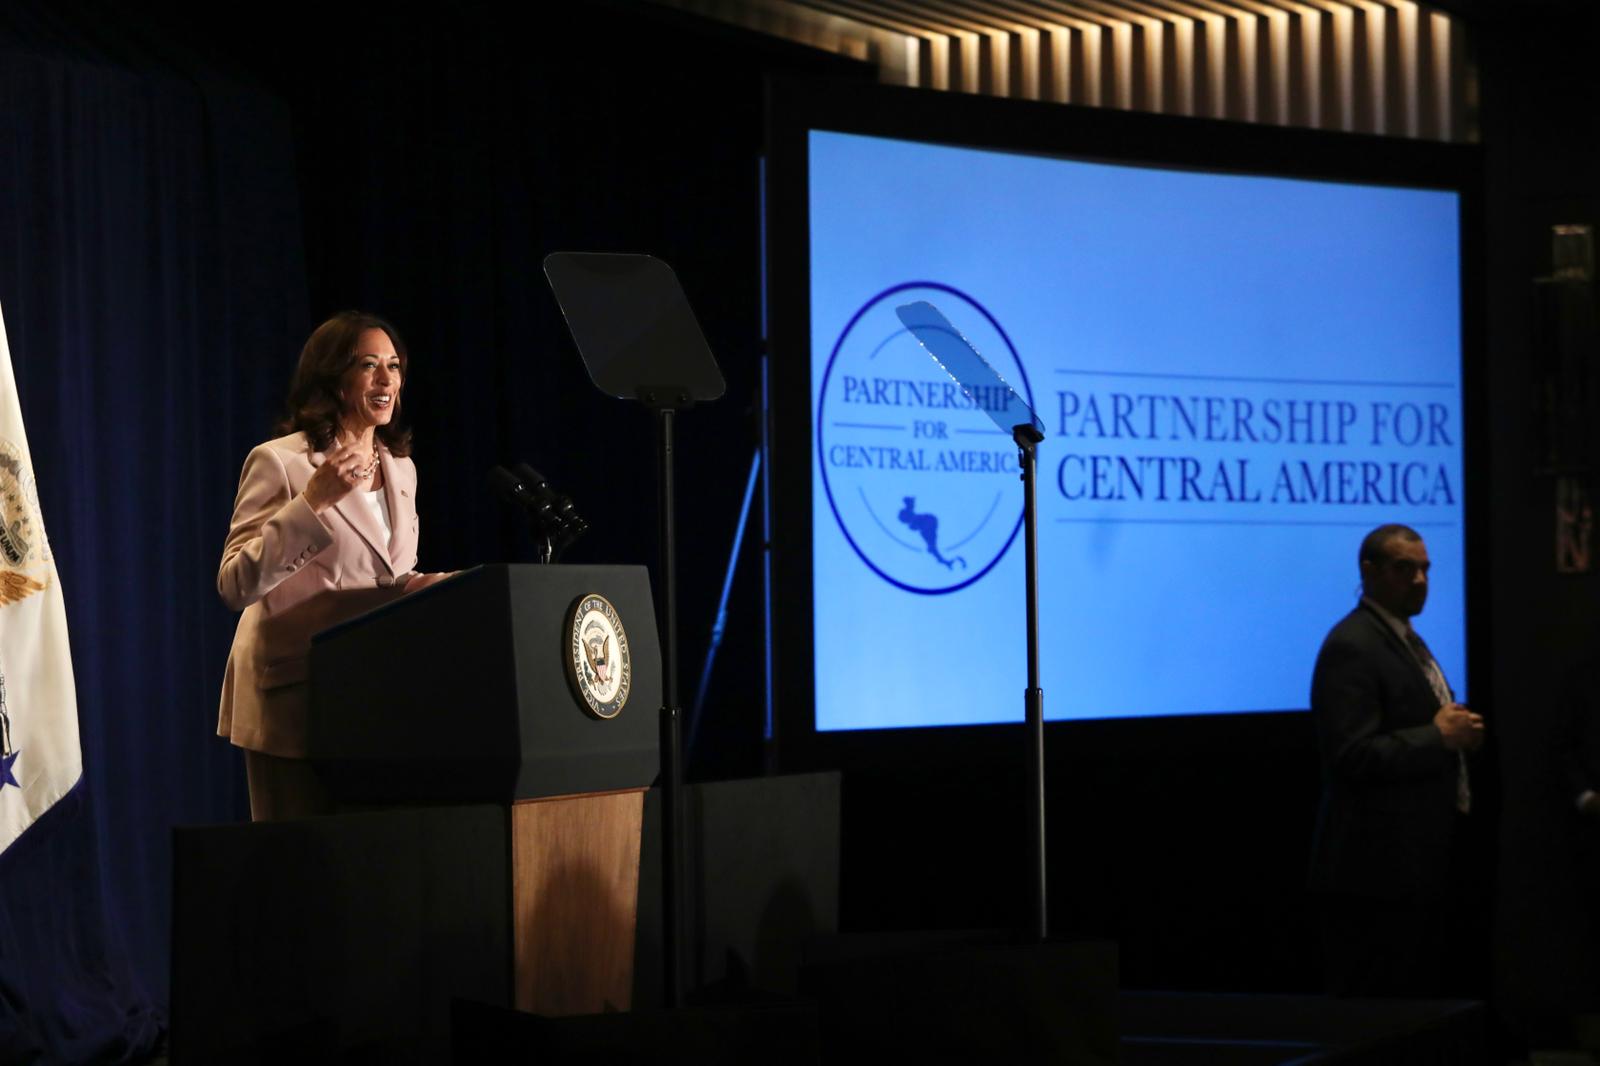 Partnership for Central America